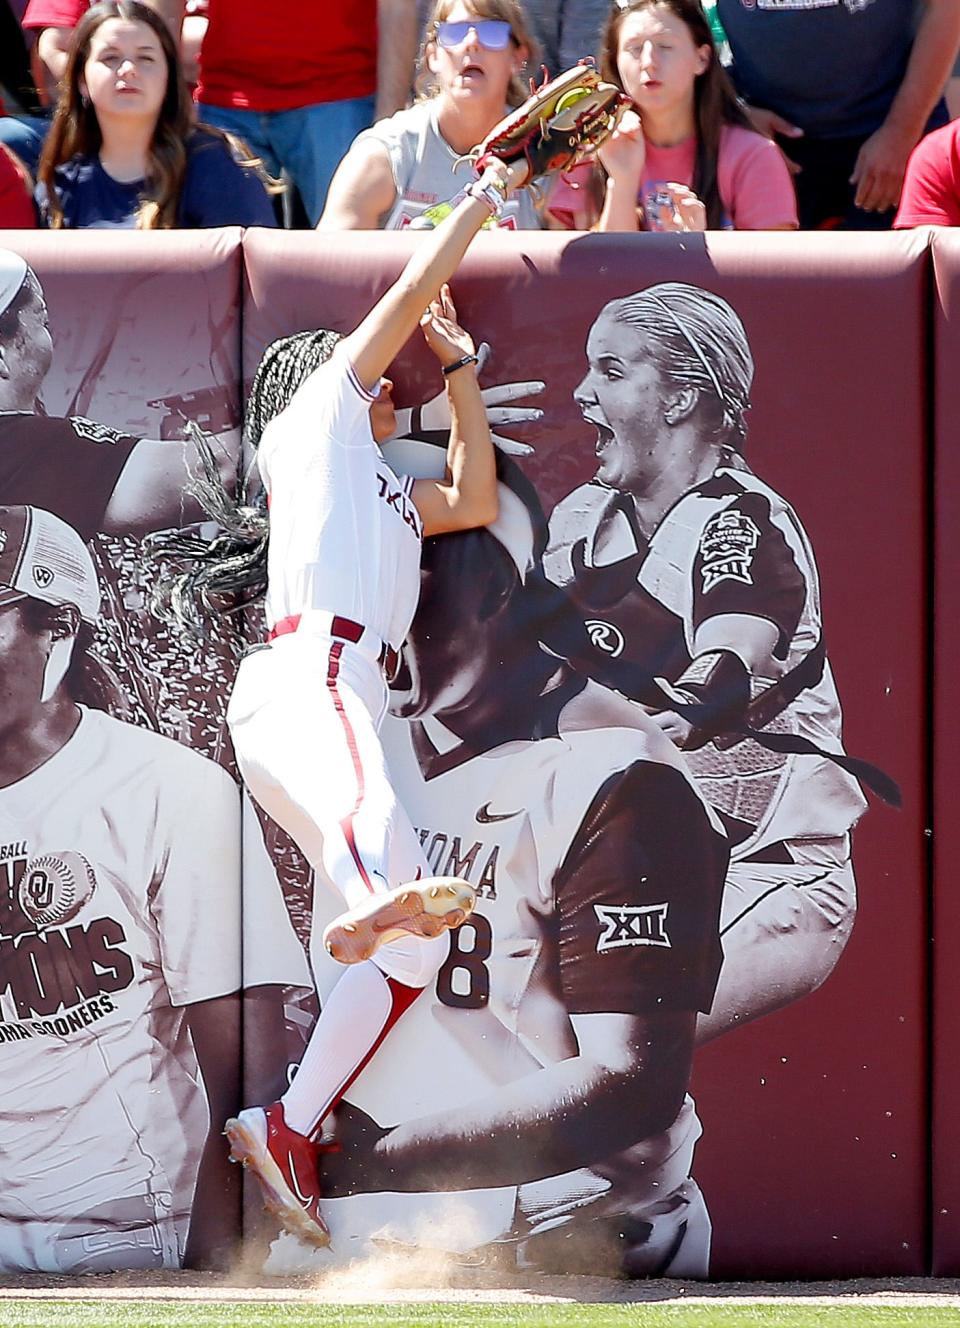 Oklahoma's Rylie Boone (0) makes a catch in the fourth inning during the college softball game between Oklahoma Sooners and the Texas Tech Red Raiders at the Marita Hynes Field in Norman, Okla., Saturday, April, 8, 2023.